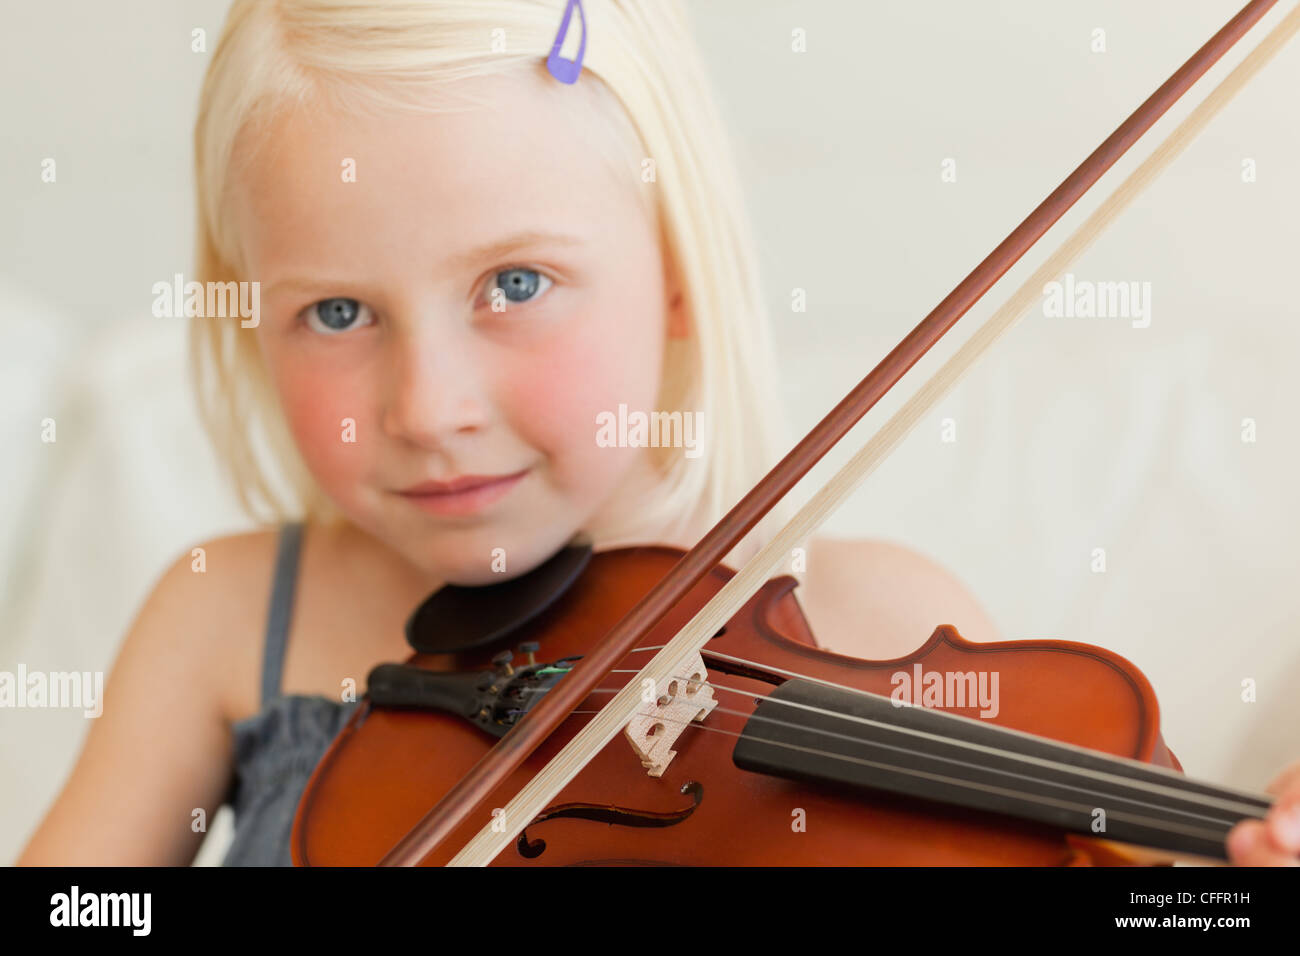 A girl looking ahead as she plays the musical instrument Stock Photo